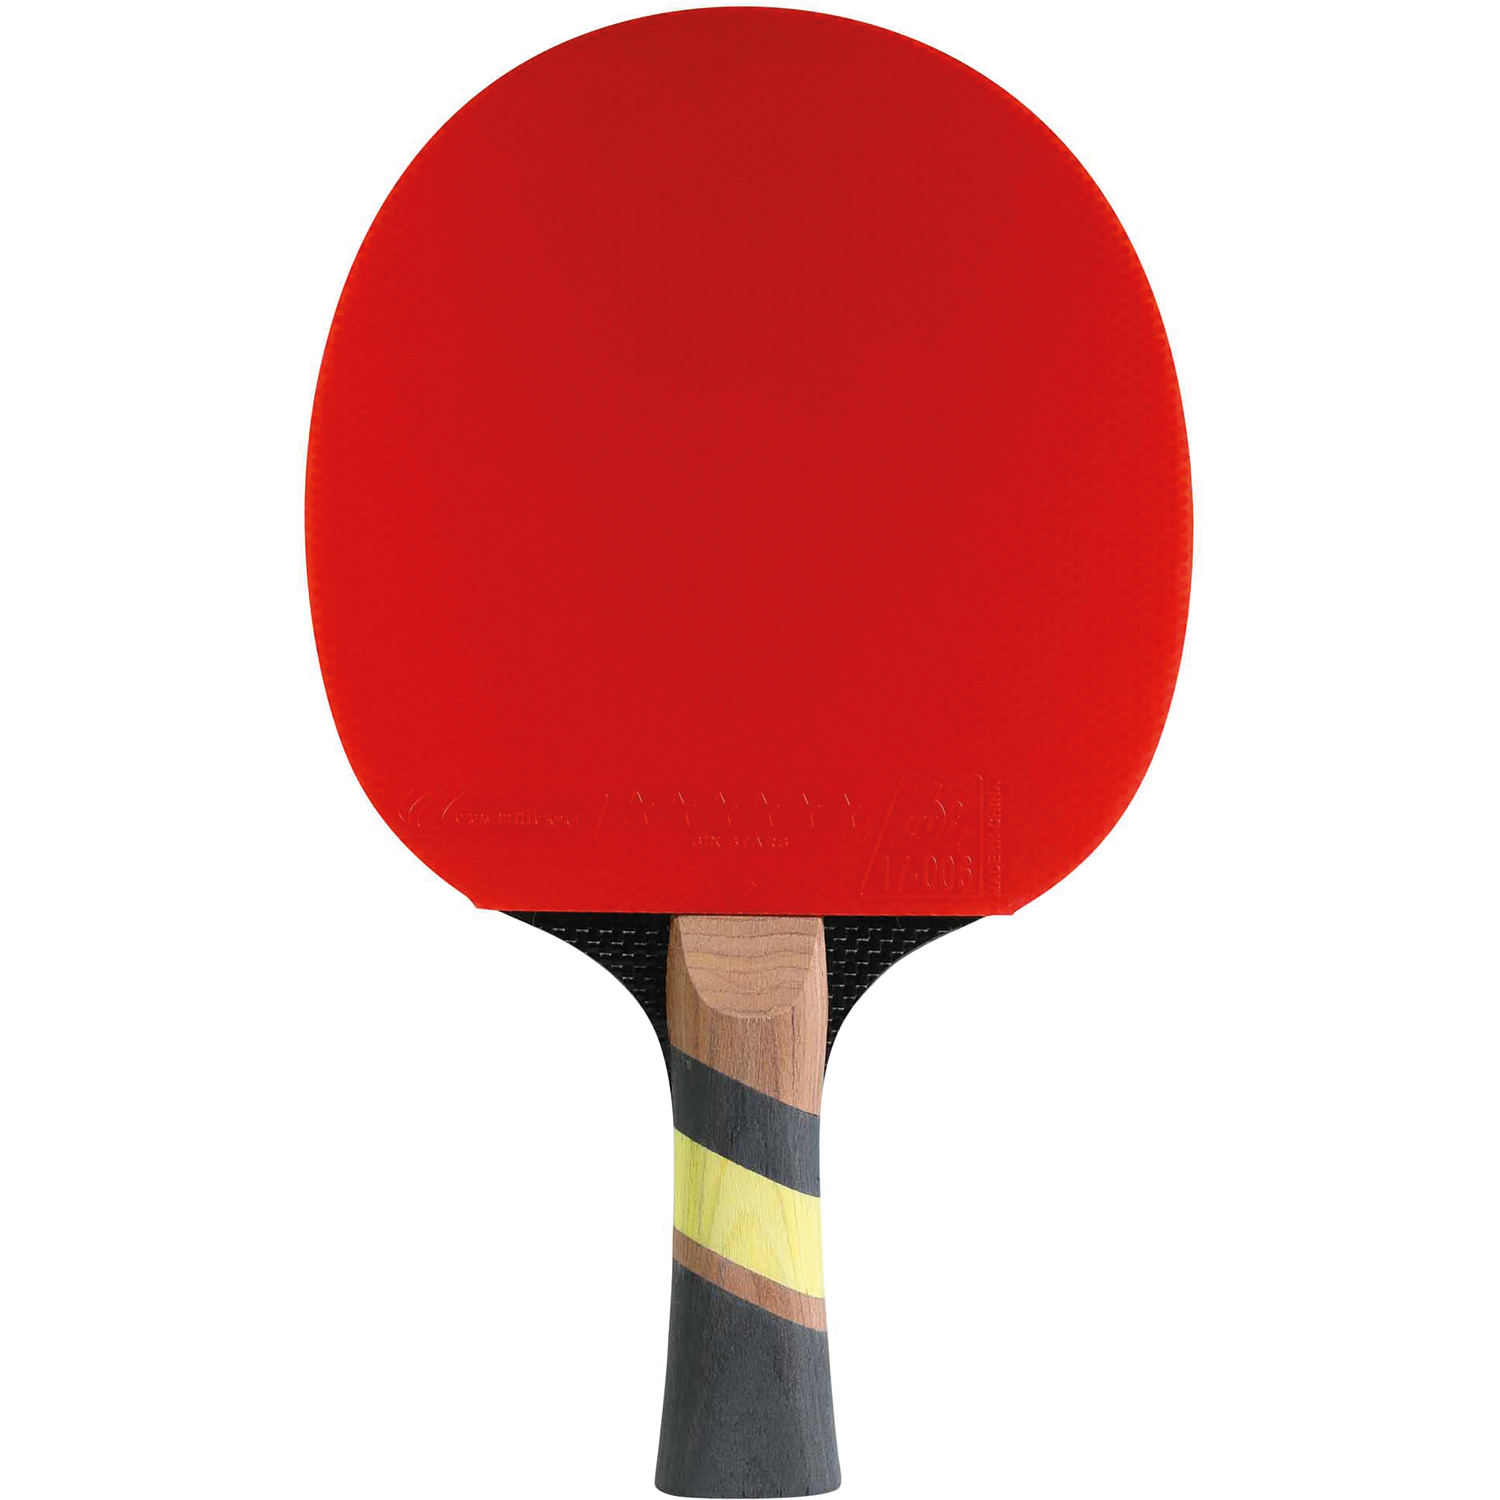 Raquete Ping Pong Cornilleau Excell 2000 | Sport Zone MKP